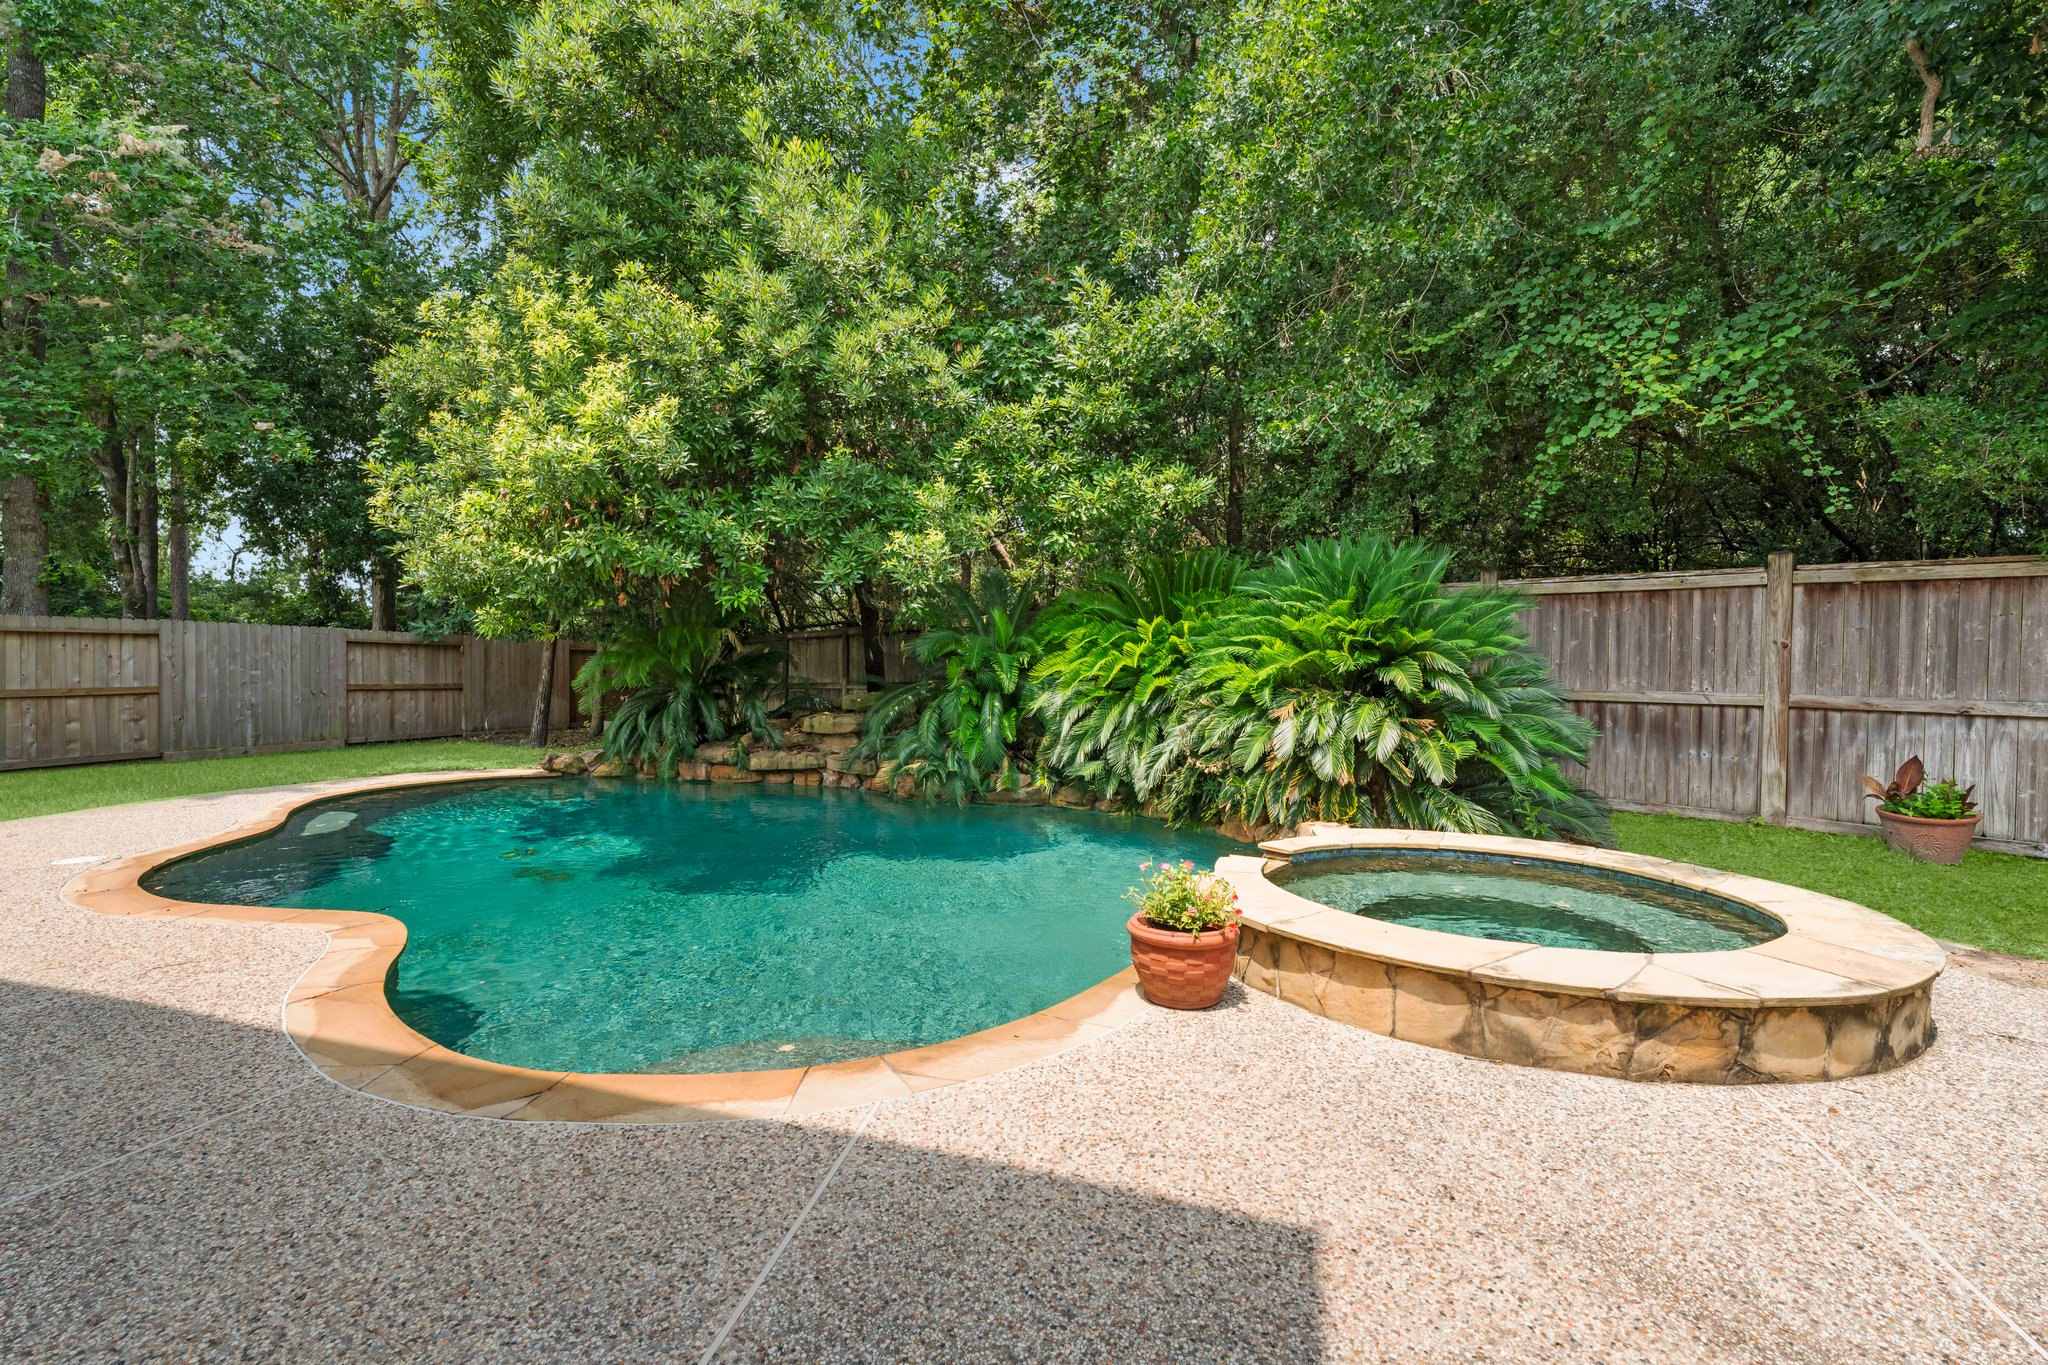 Step out the backdoor into a relaxing and tranquil tree lined backyard.